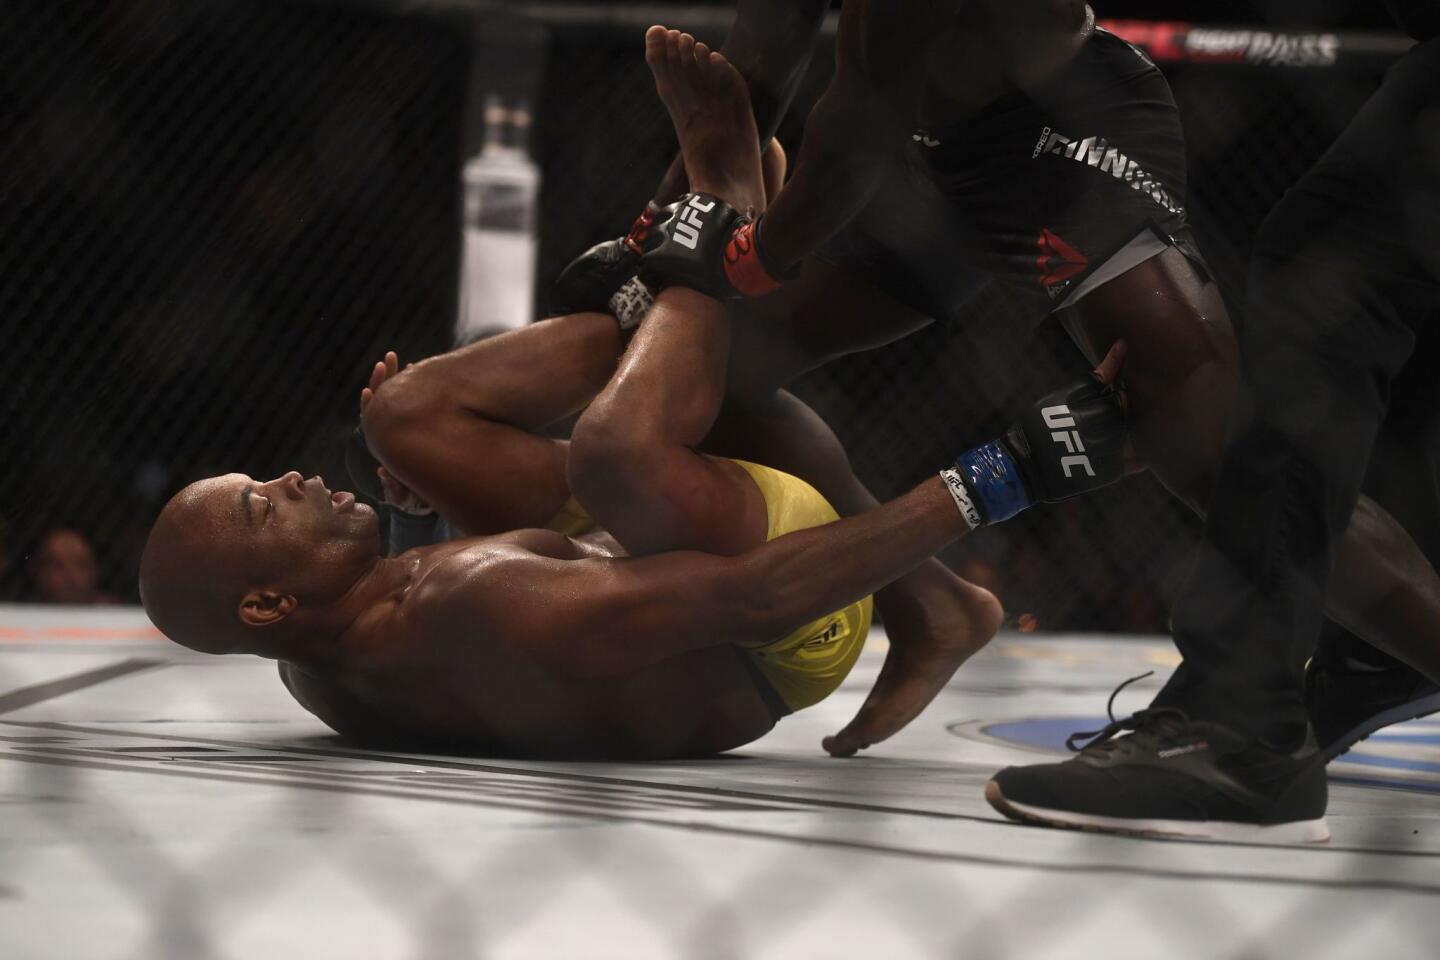 Brazilian fighter Anderson Silva reacts inside the octagon after injuring his knee during the fight against US fighter Jared Cannonier at their men's middleweight bout at the Ultimate Fighting Championship 237 event (UFC 237) at Jeunesse Arena in Rio de Janeiro on May 11, 2019.